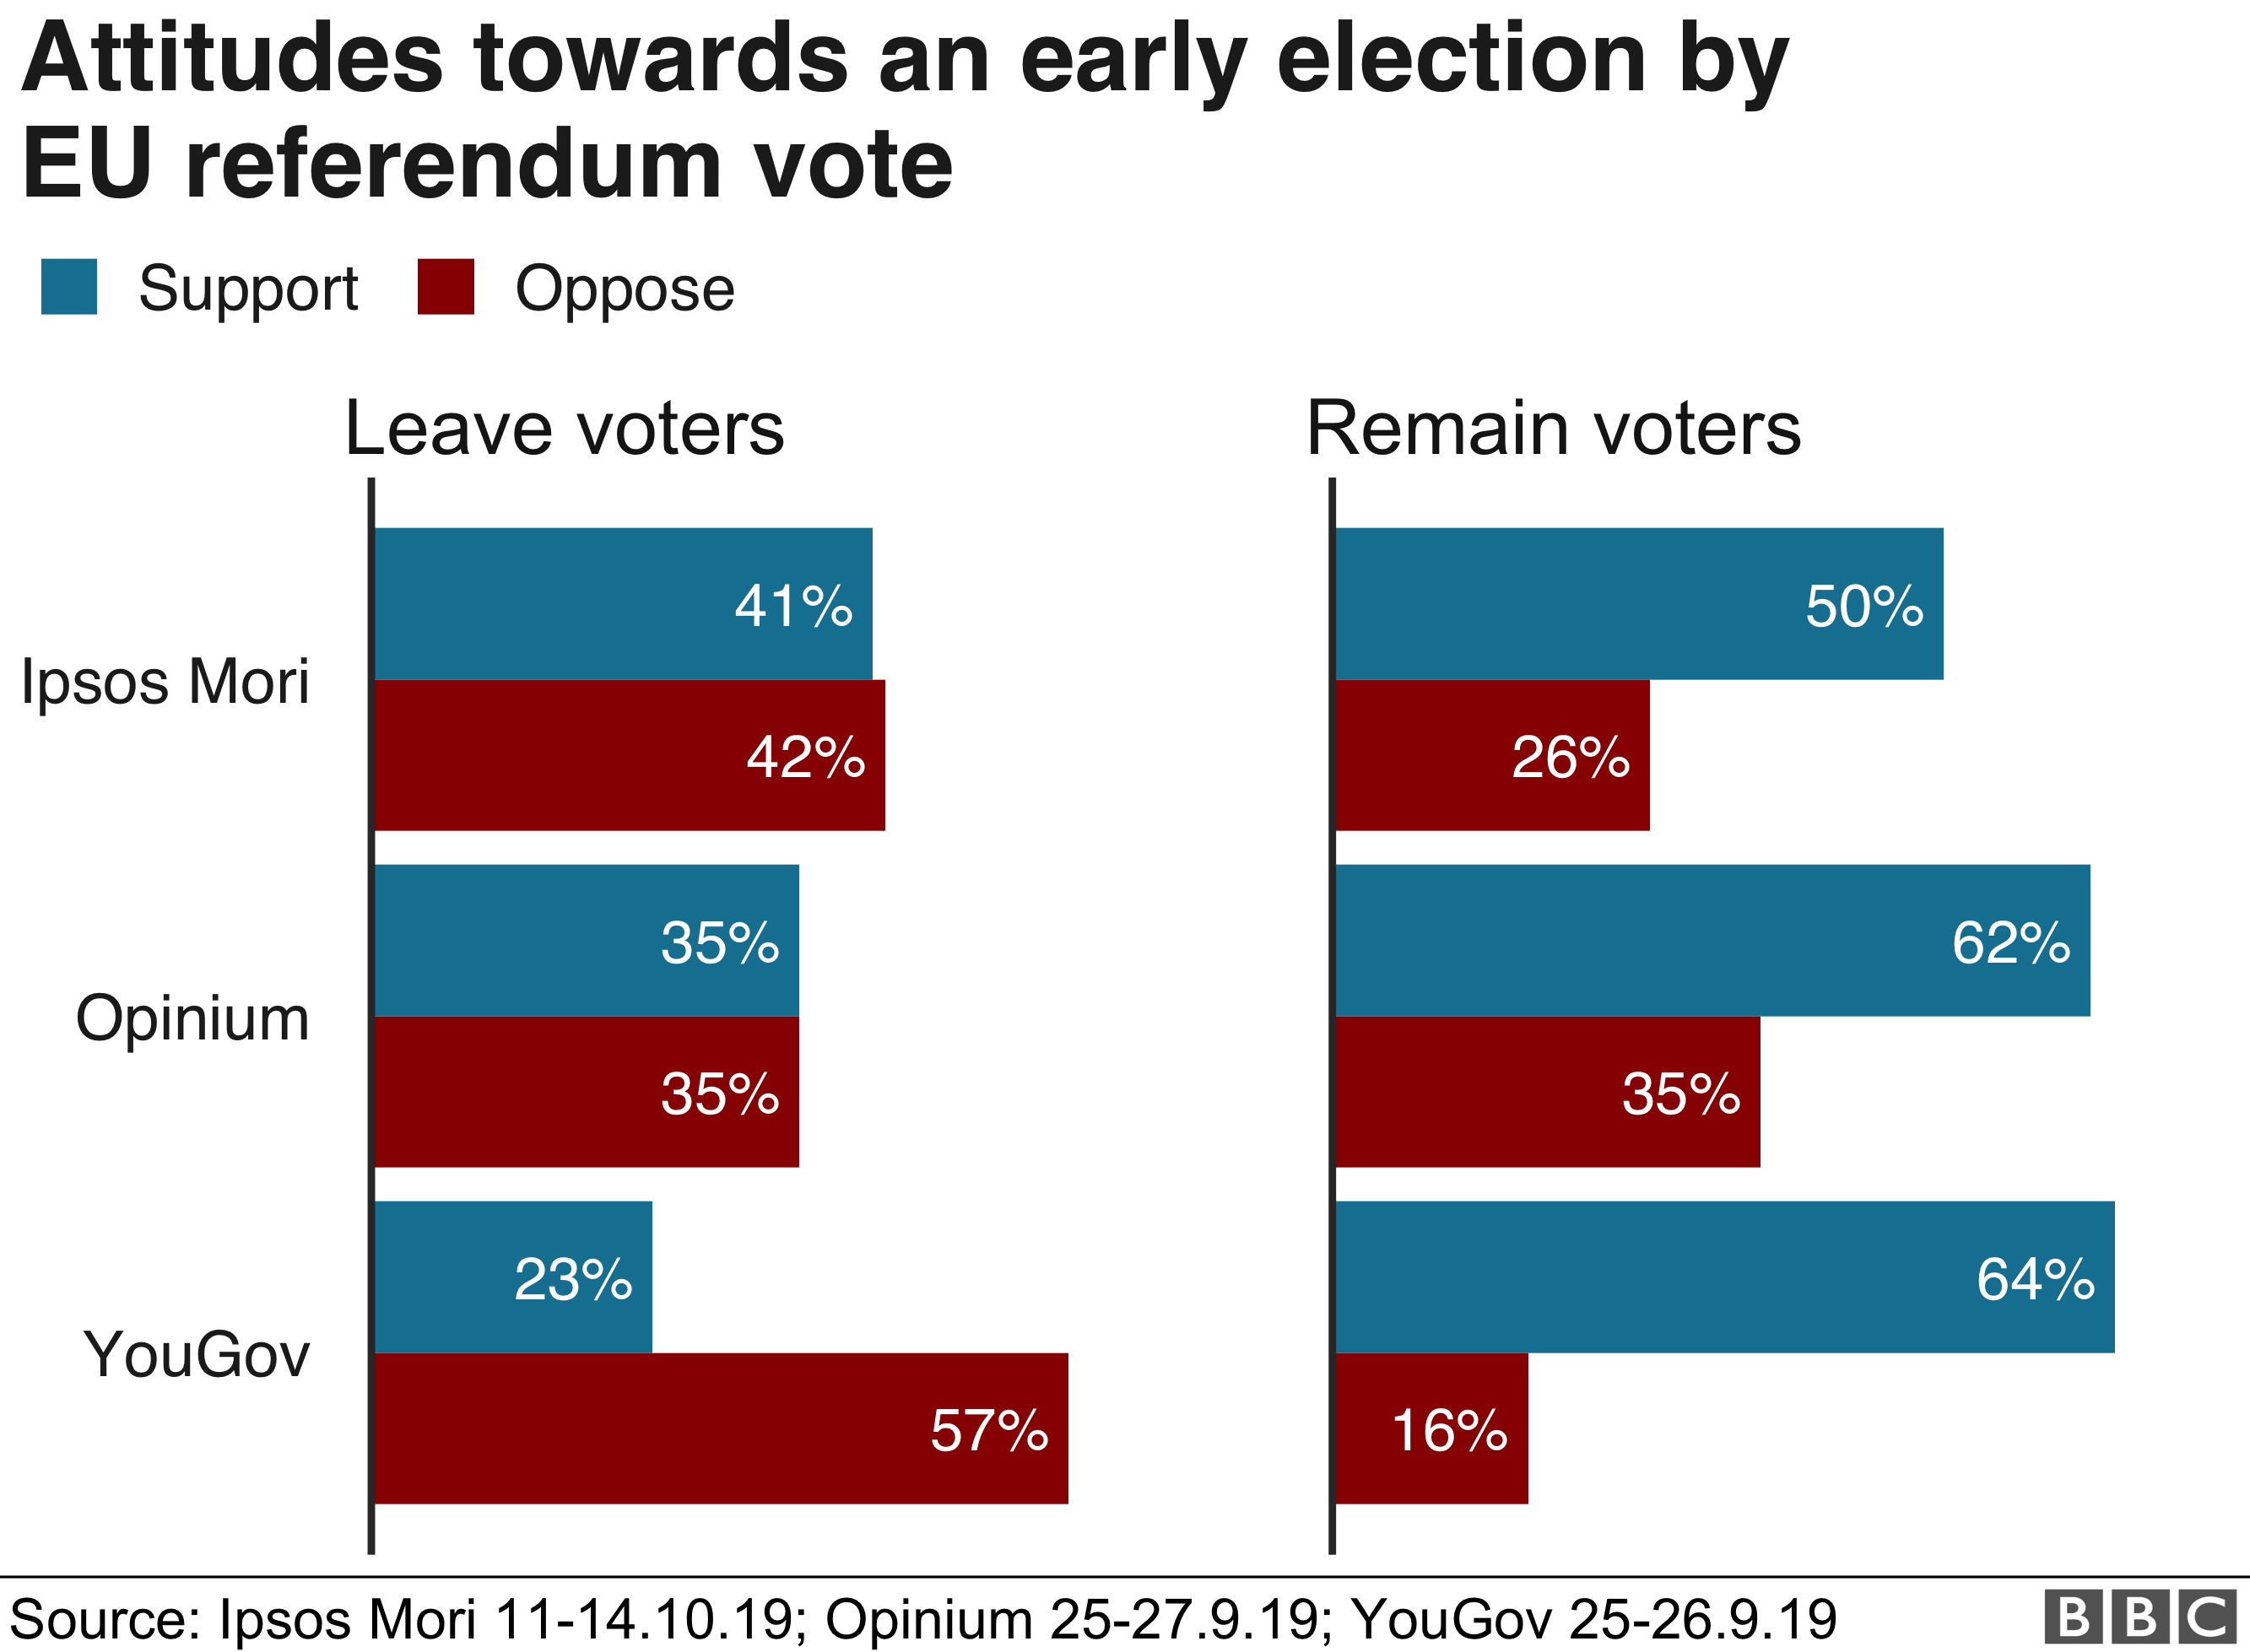 Chart on early election by EU ref vote